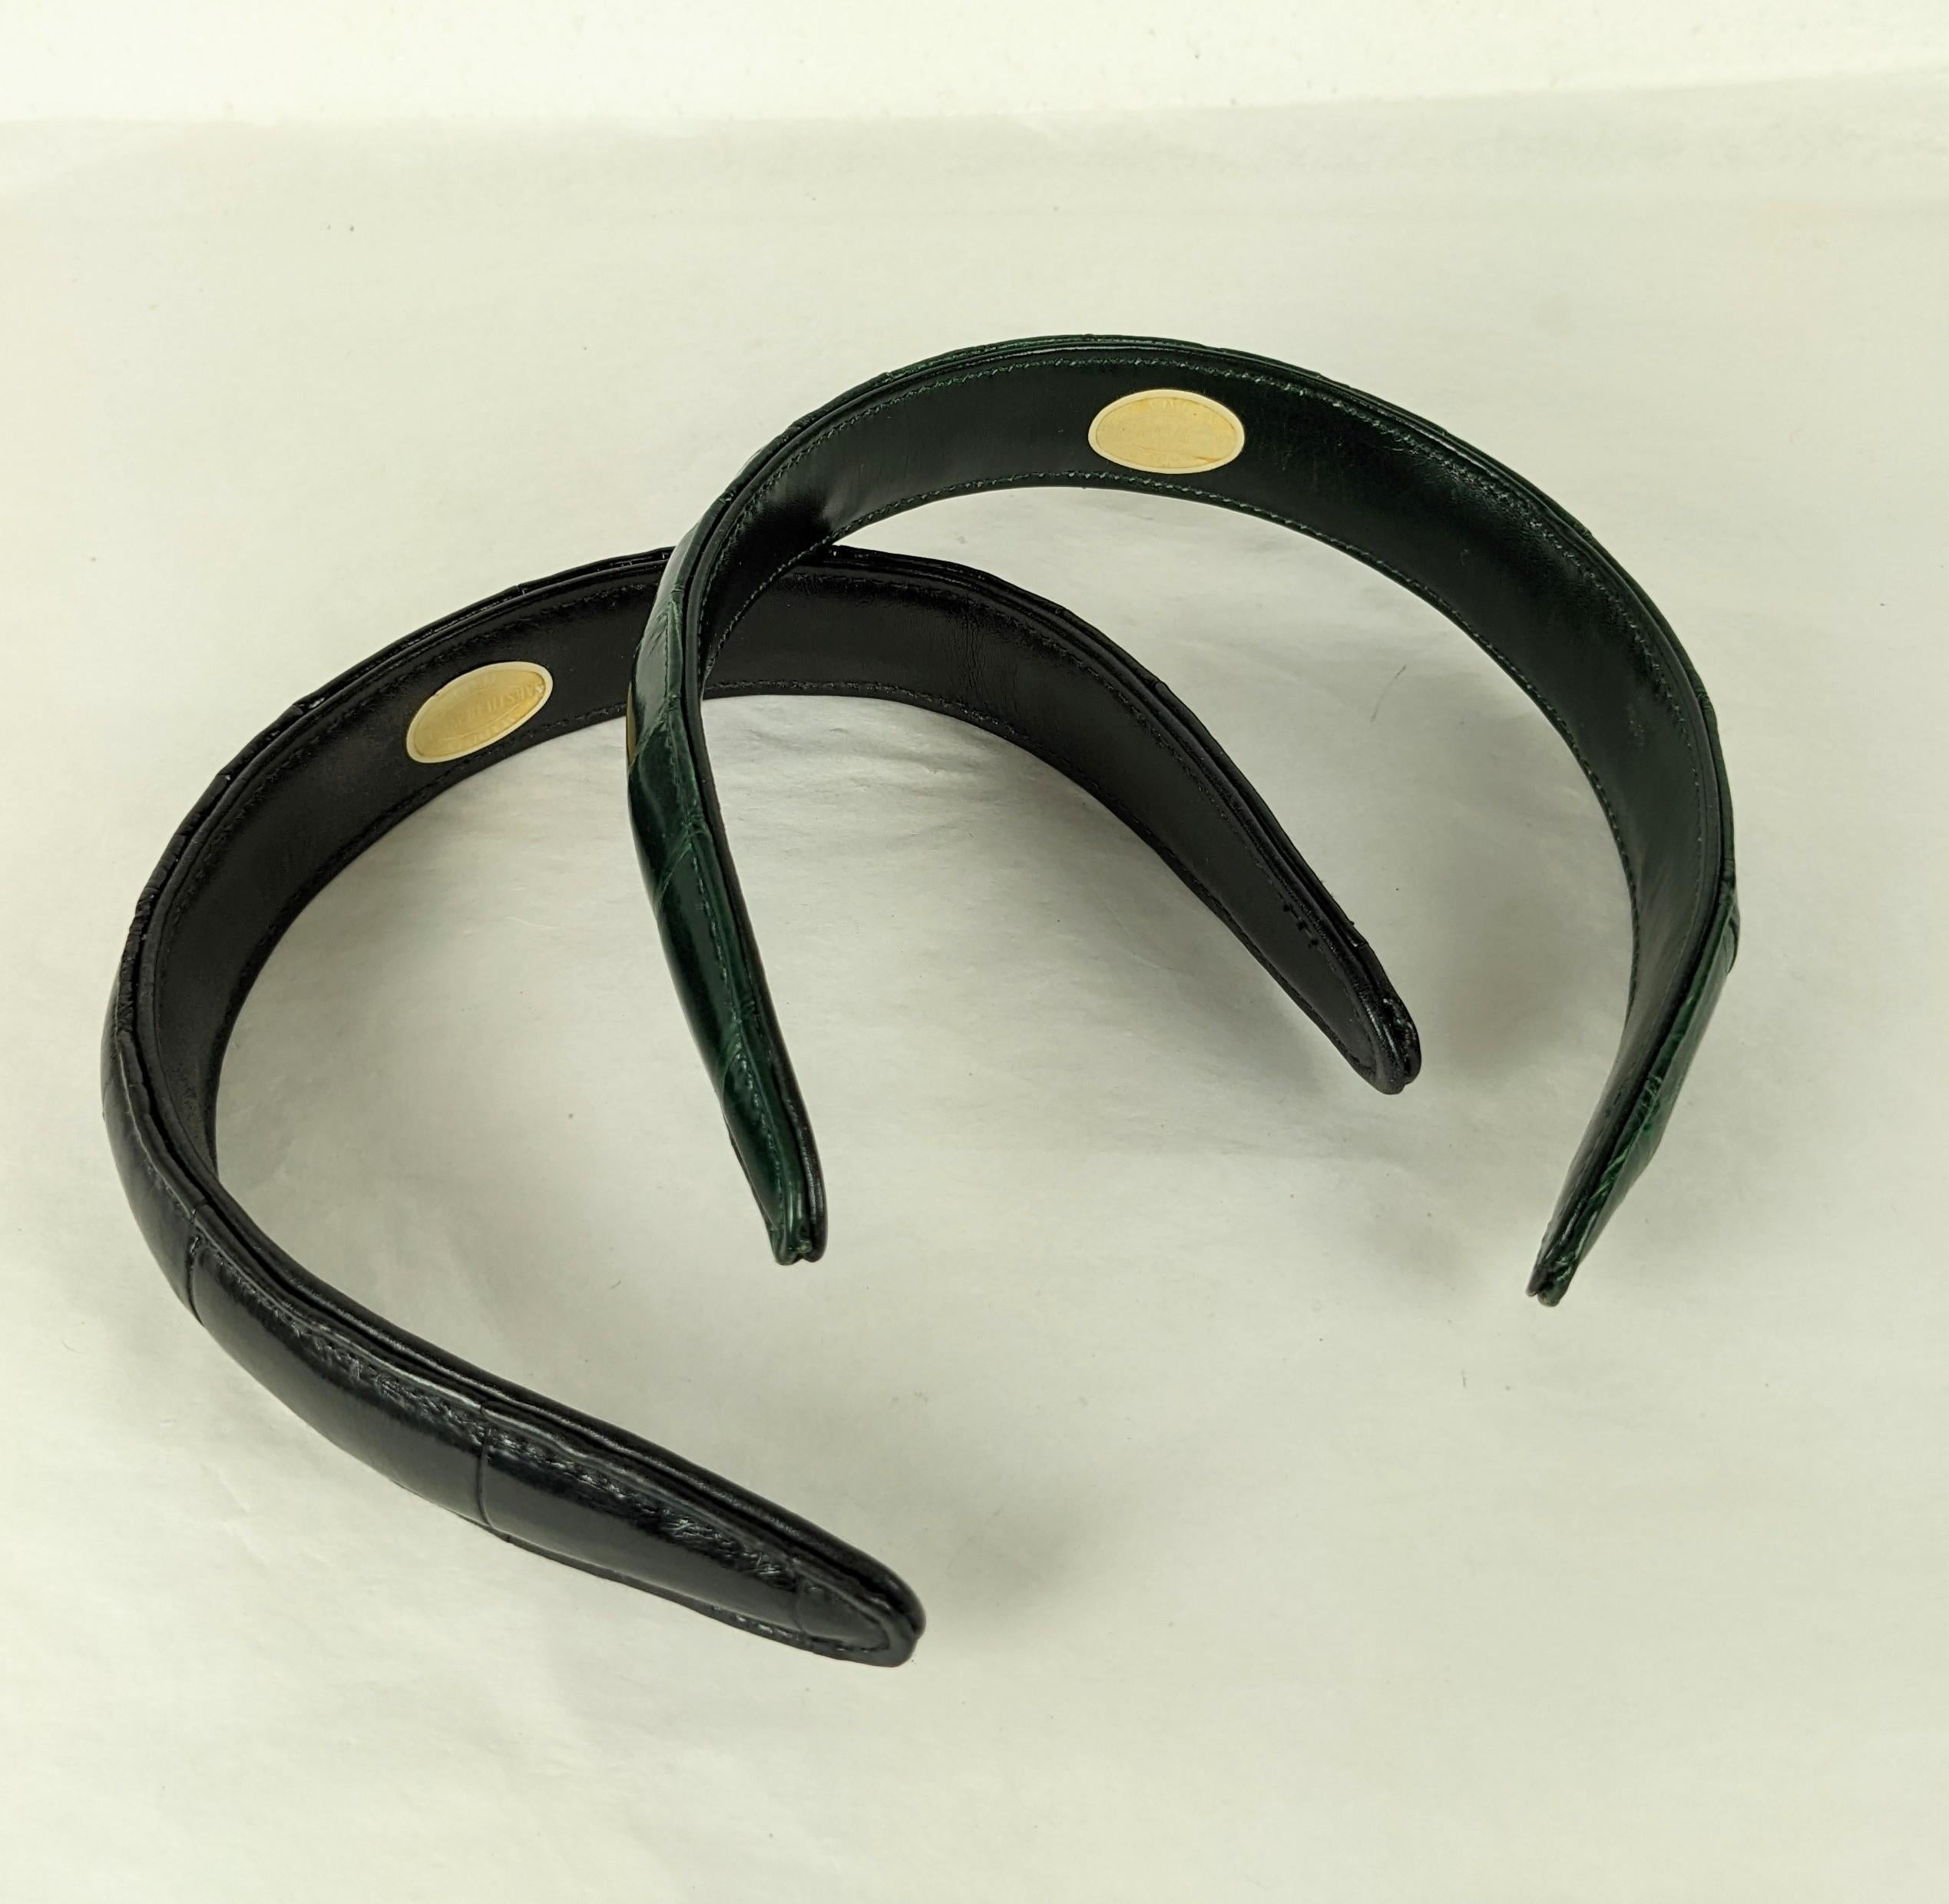 Black Pair of Alligator Hair Bands For Sale